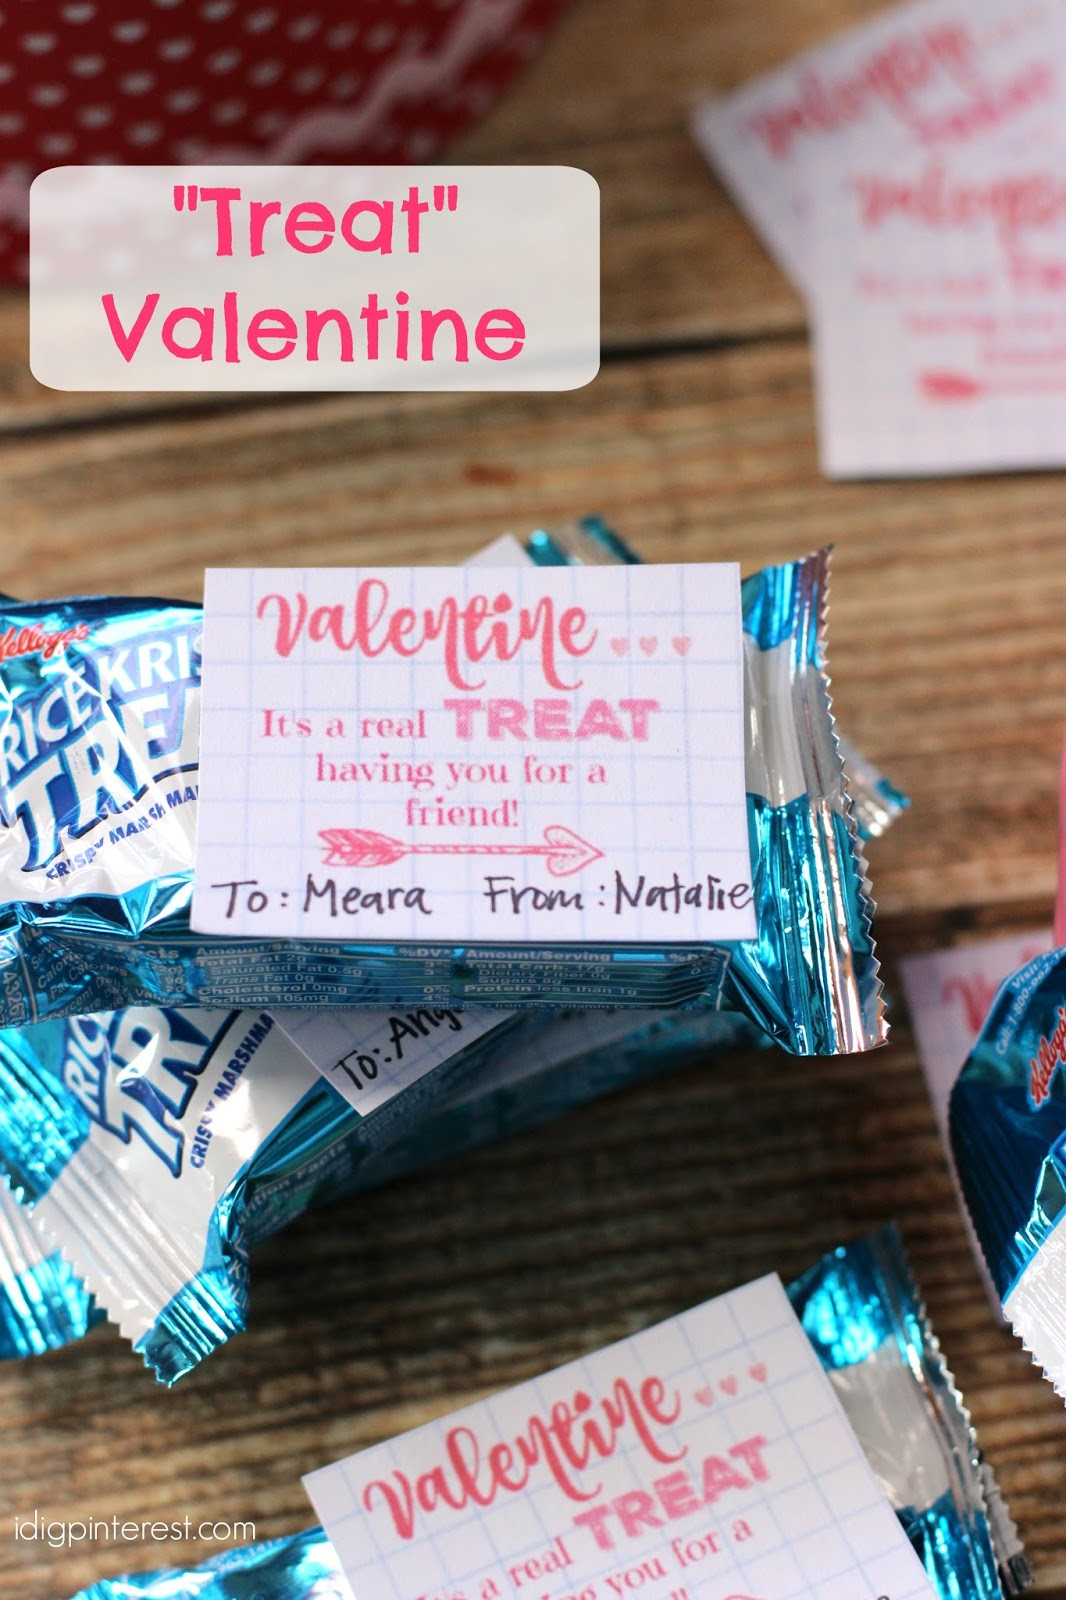 Valentines Day Treats For School
 "Treat" Valentine Idea with Free Printable Tags I Dig